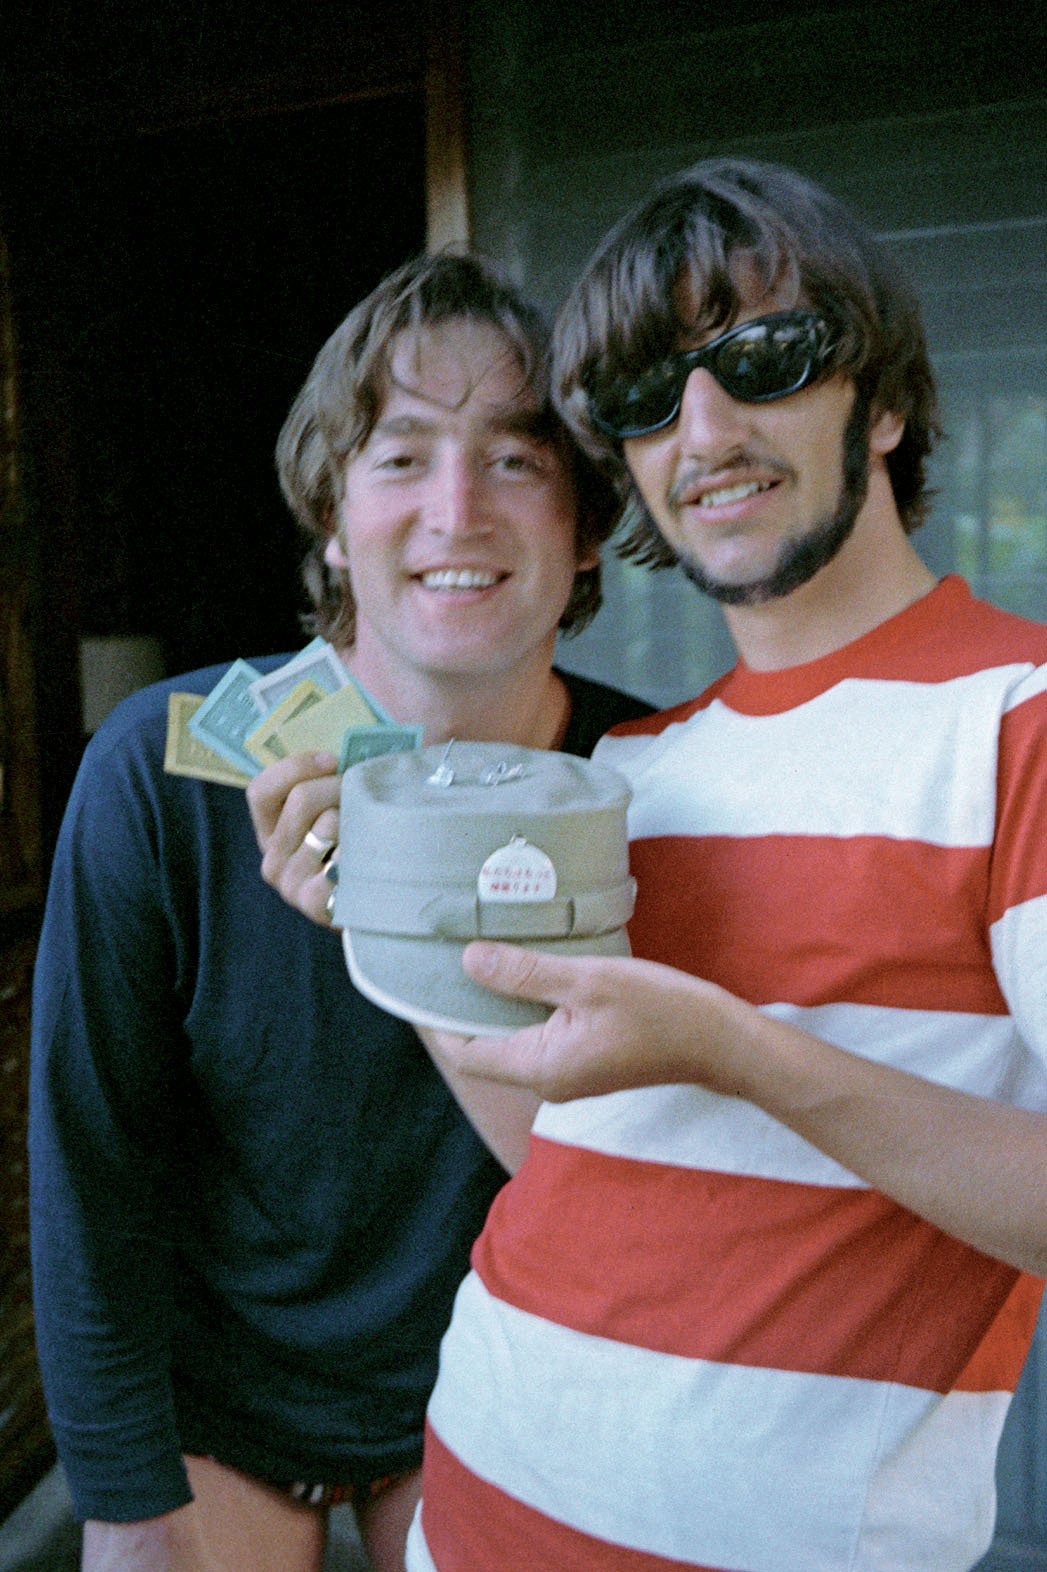 John Lennon and Ringo Starr (with his Monopoly winnings - paper money, earrings, and a cap) holidaying in Trinidad & Tobago, from Ringo Starr’s personal collection. (January 12th-23rd, 1966)
-
We were on holiday here. And we were having a good time....